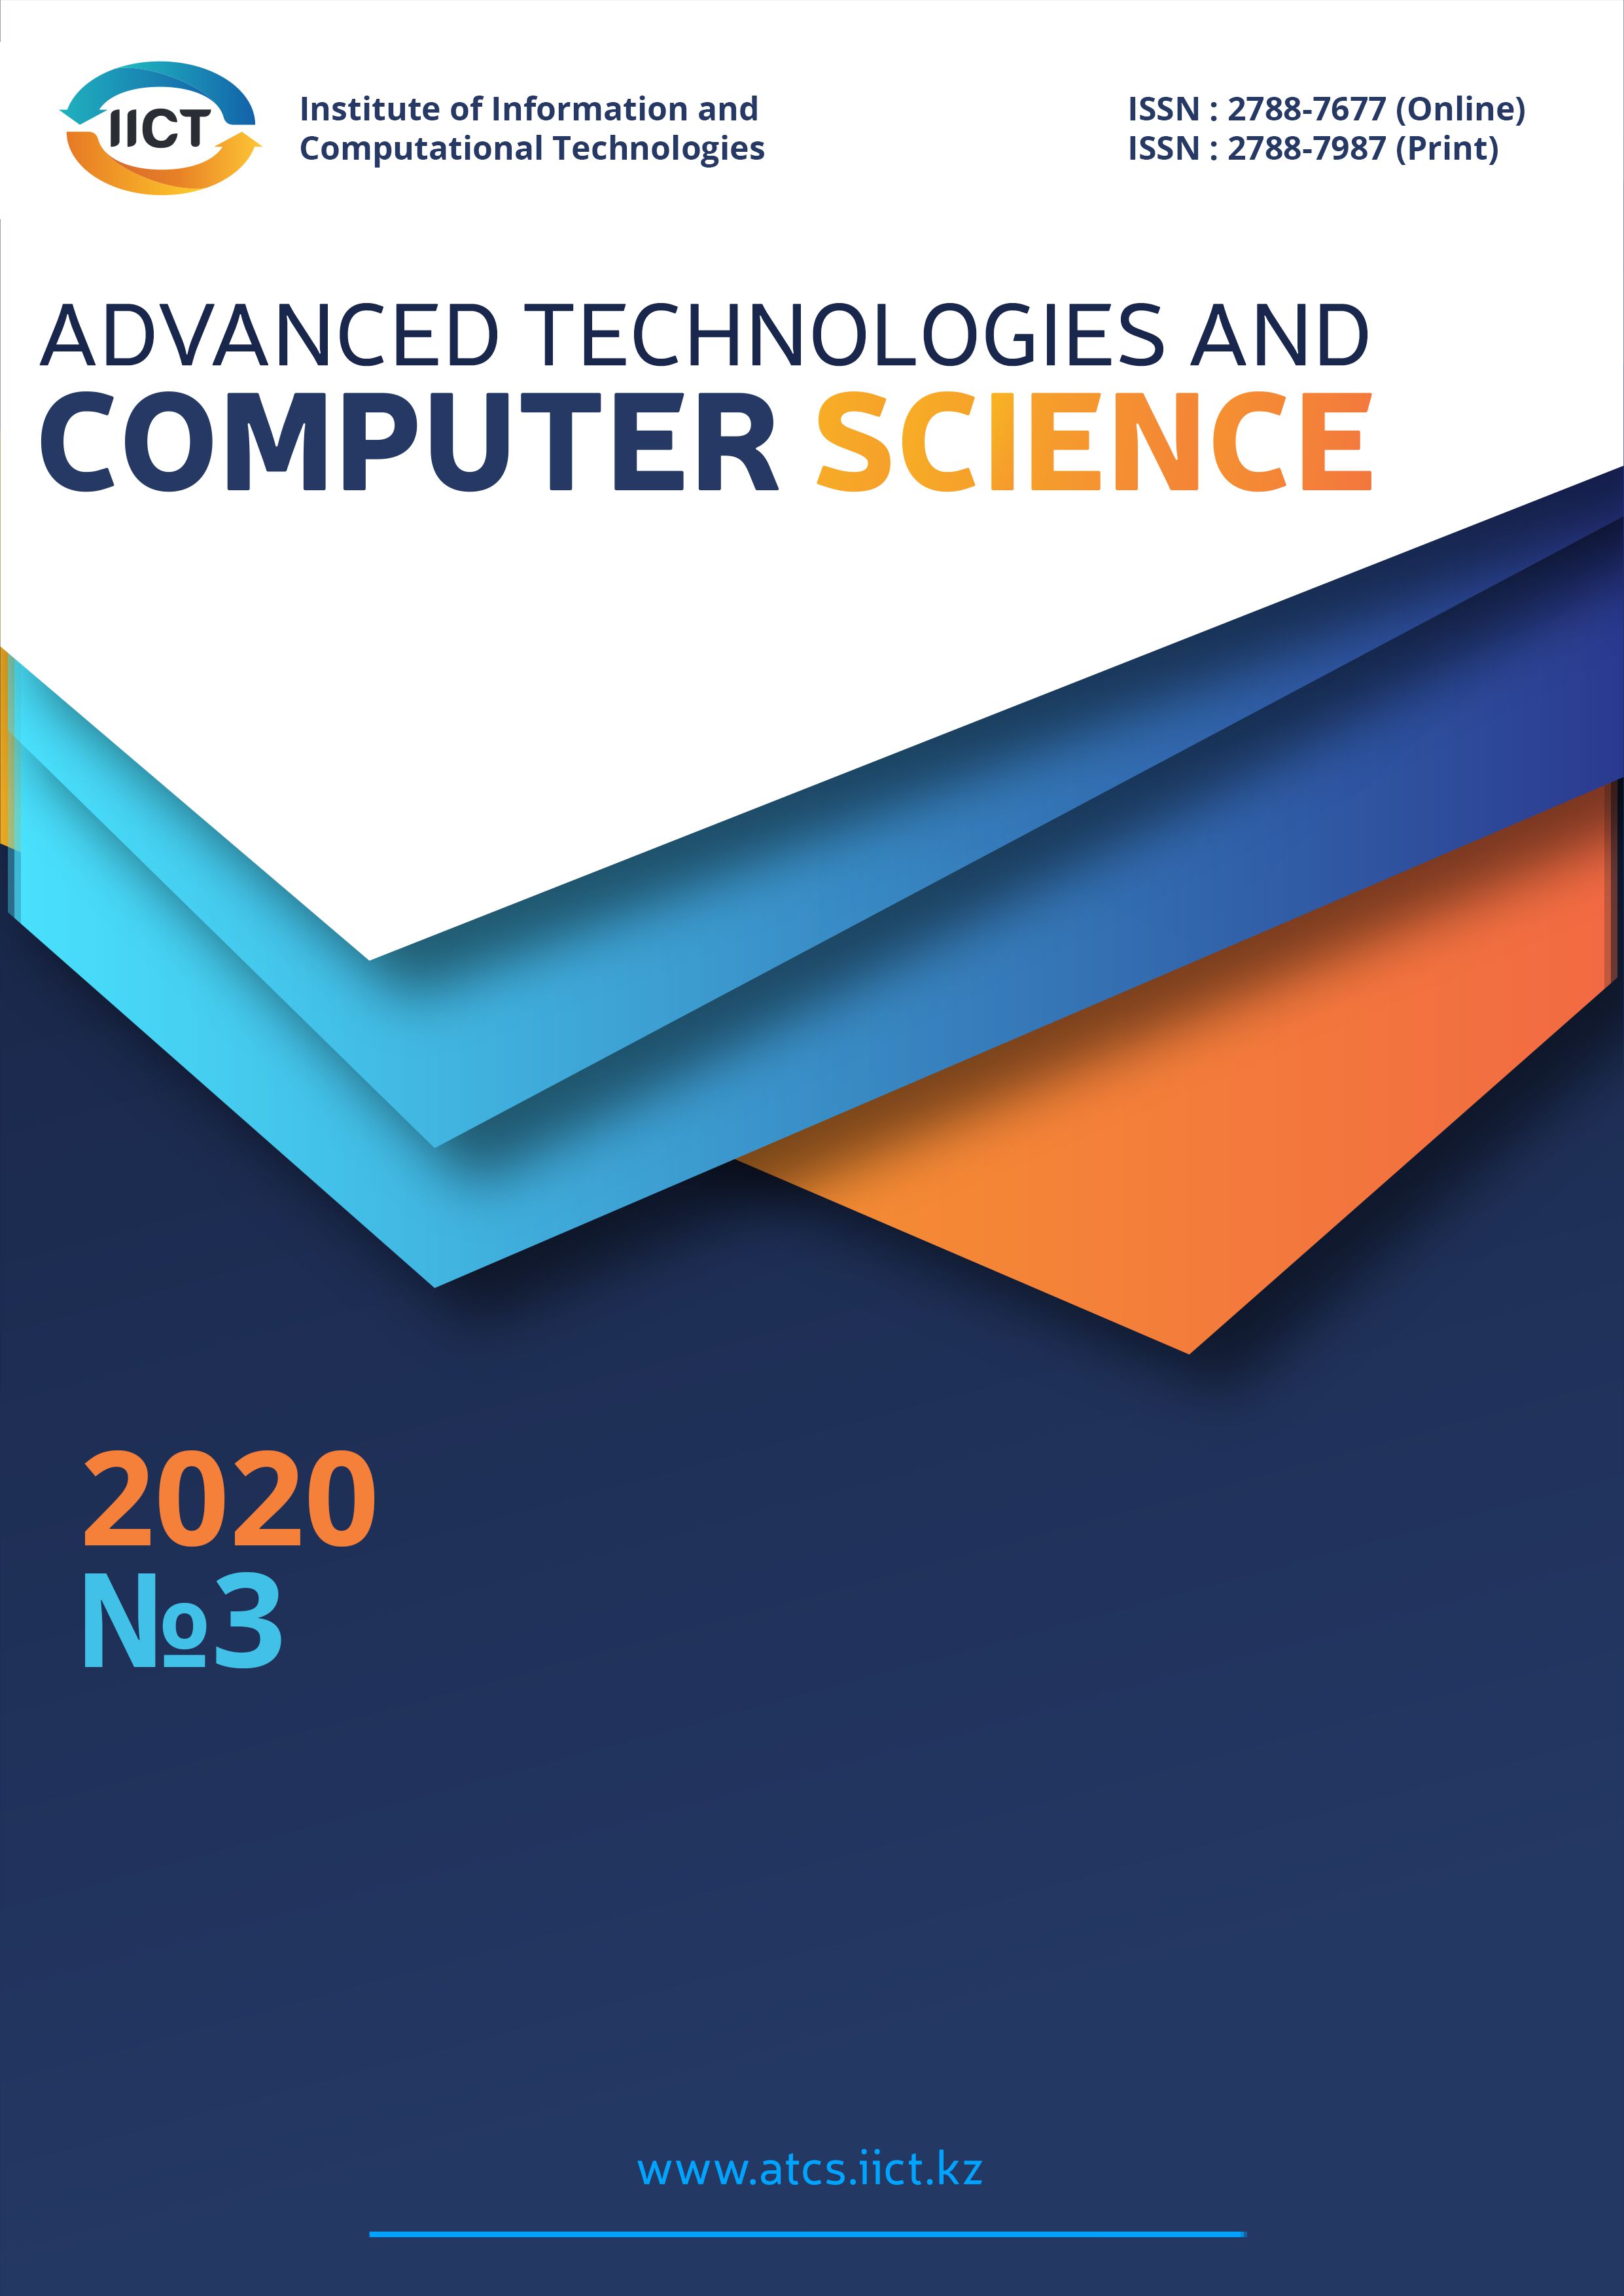 					View No. 3 (2020): Advanced technologies and computer science
				